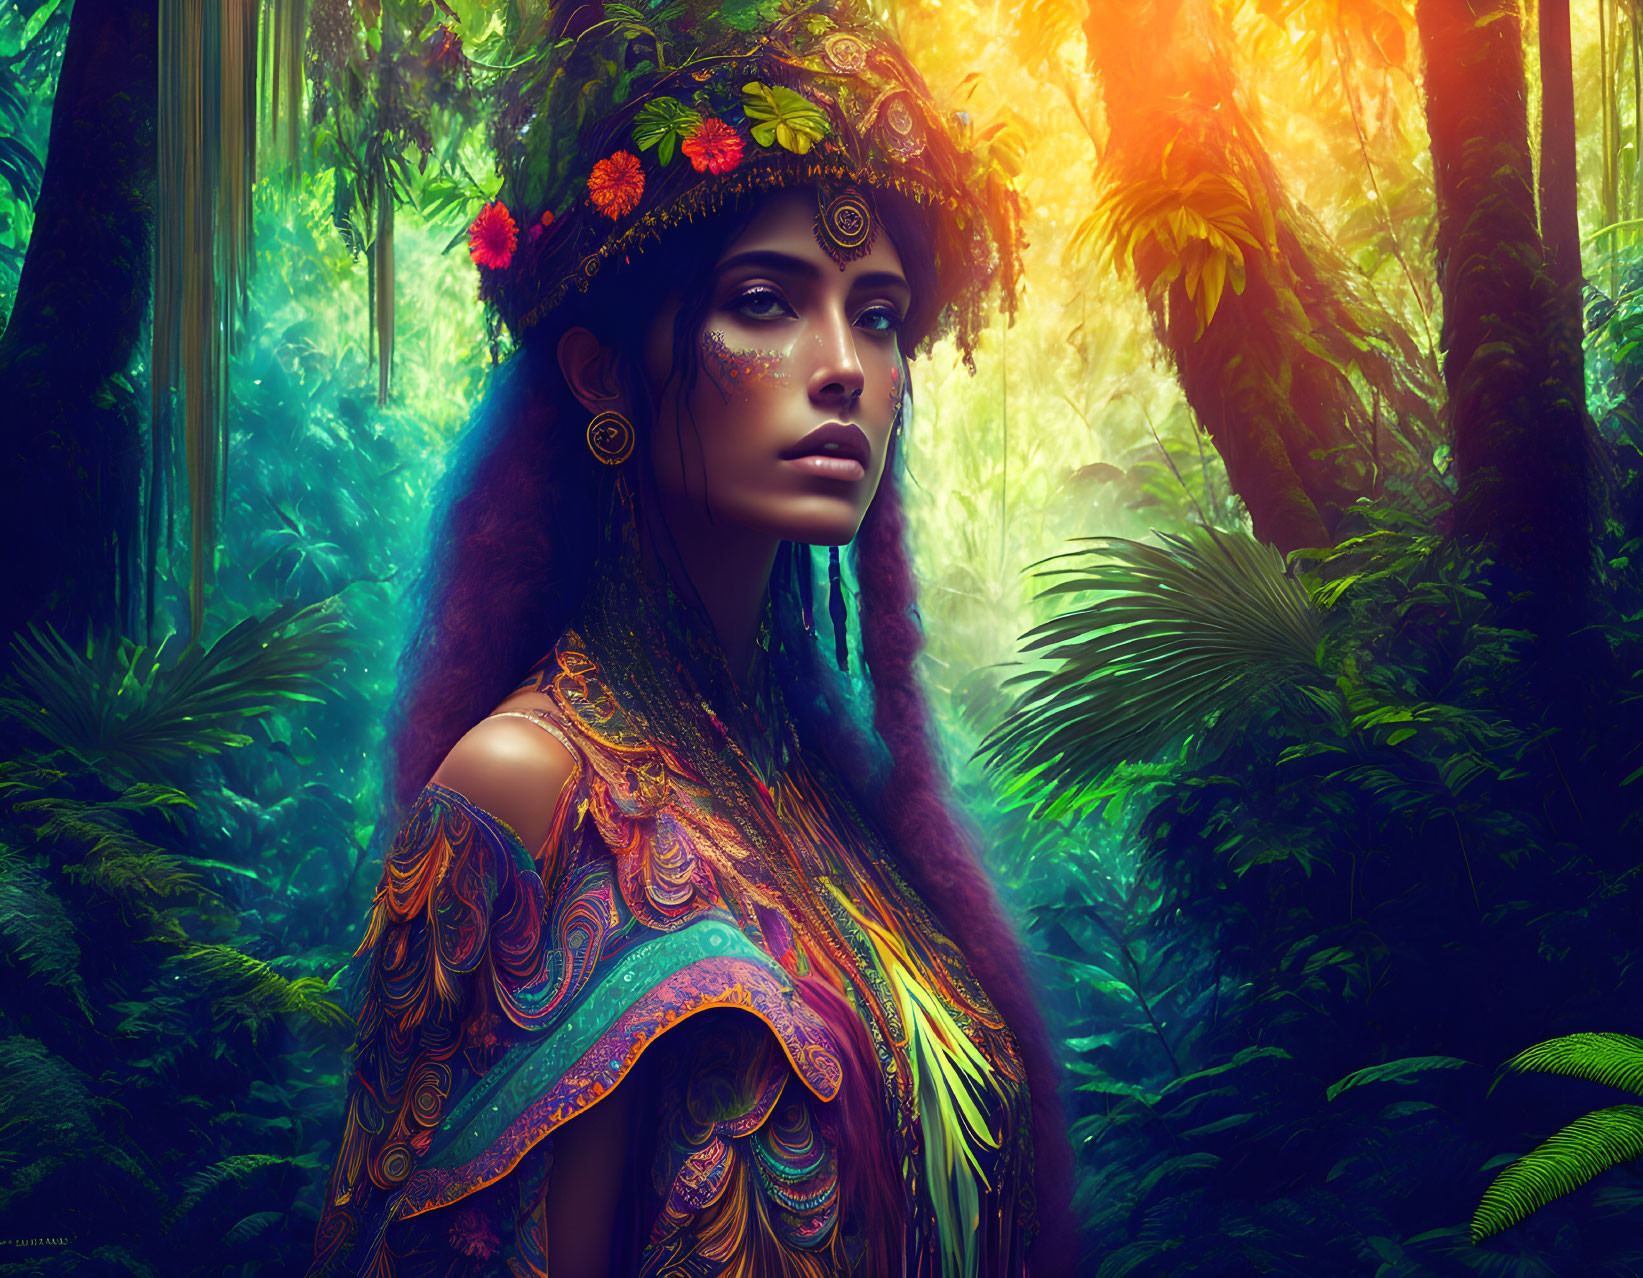 Elaborate face paint and floral headpiece in vibrant rainforest